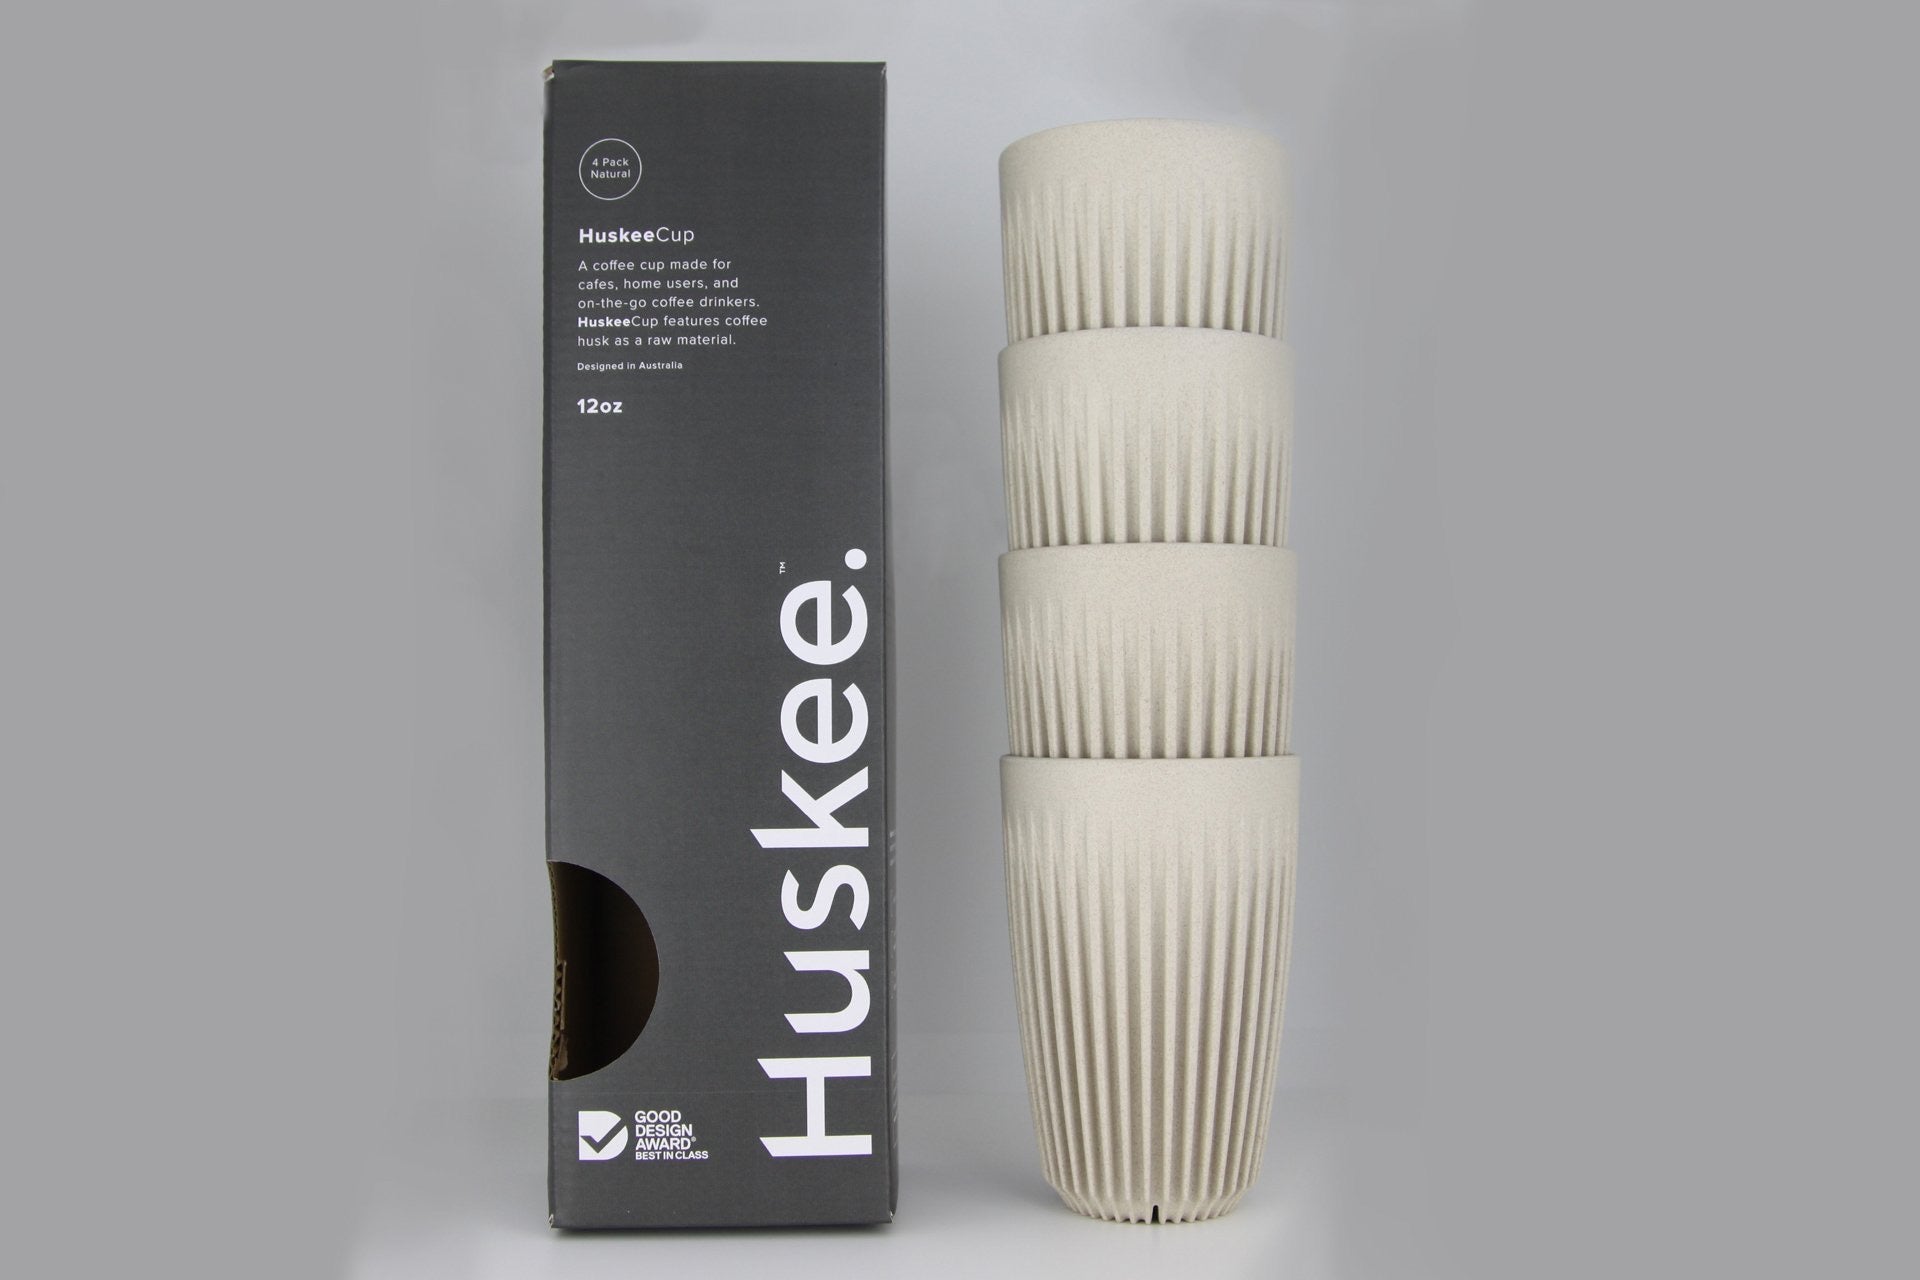 4 x 350ml Huskee Cup - White